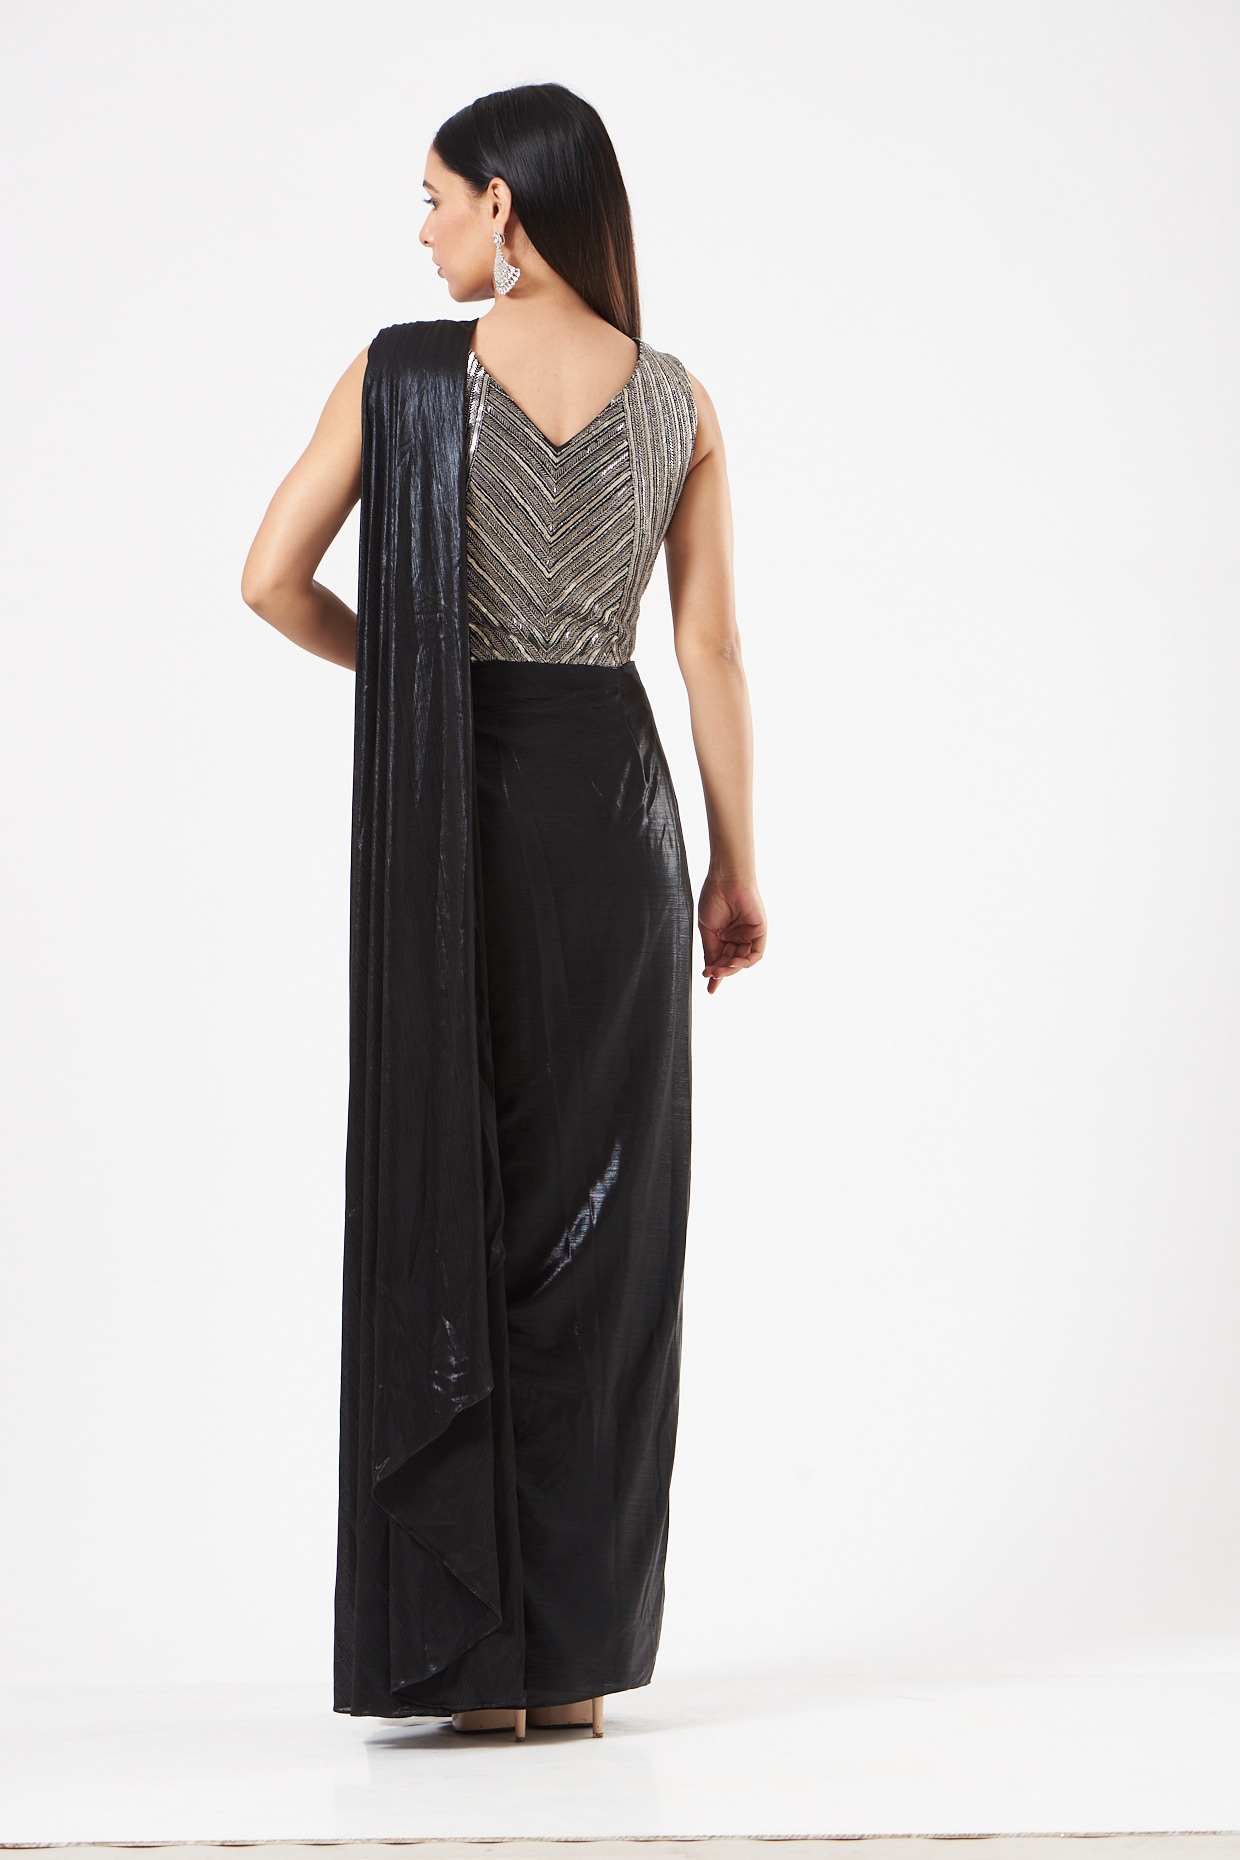 Buy Black Chiffon Cocktail Saree Online in the UK @Mohey - Saree for Women